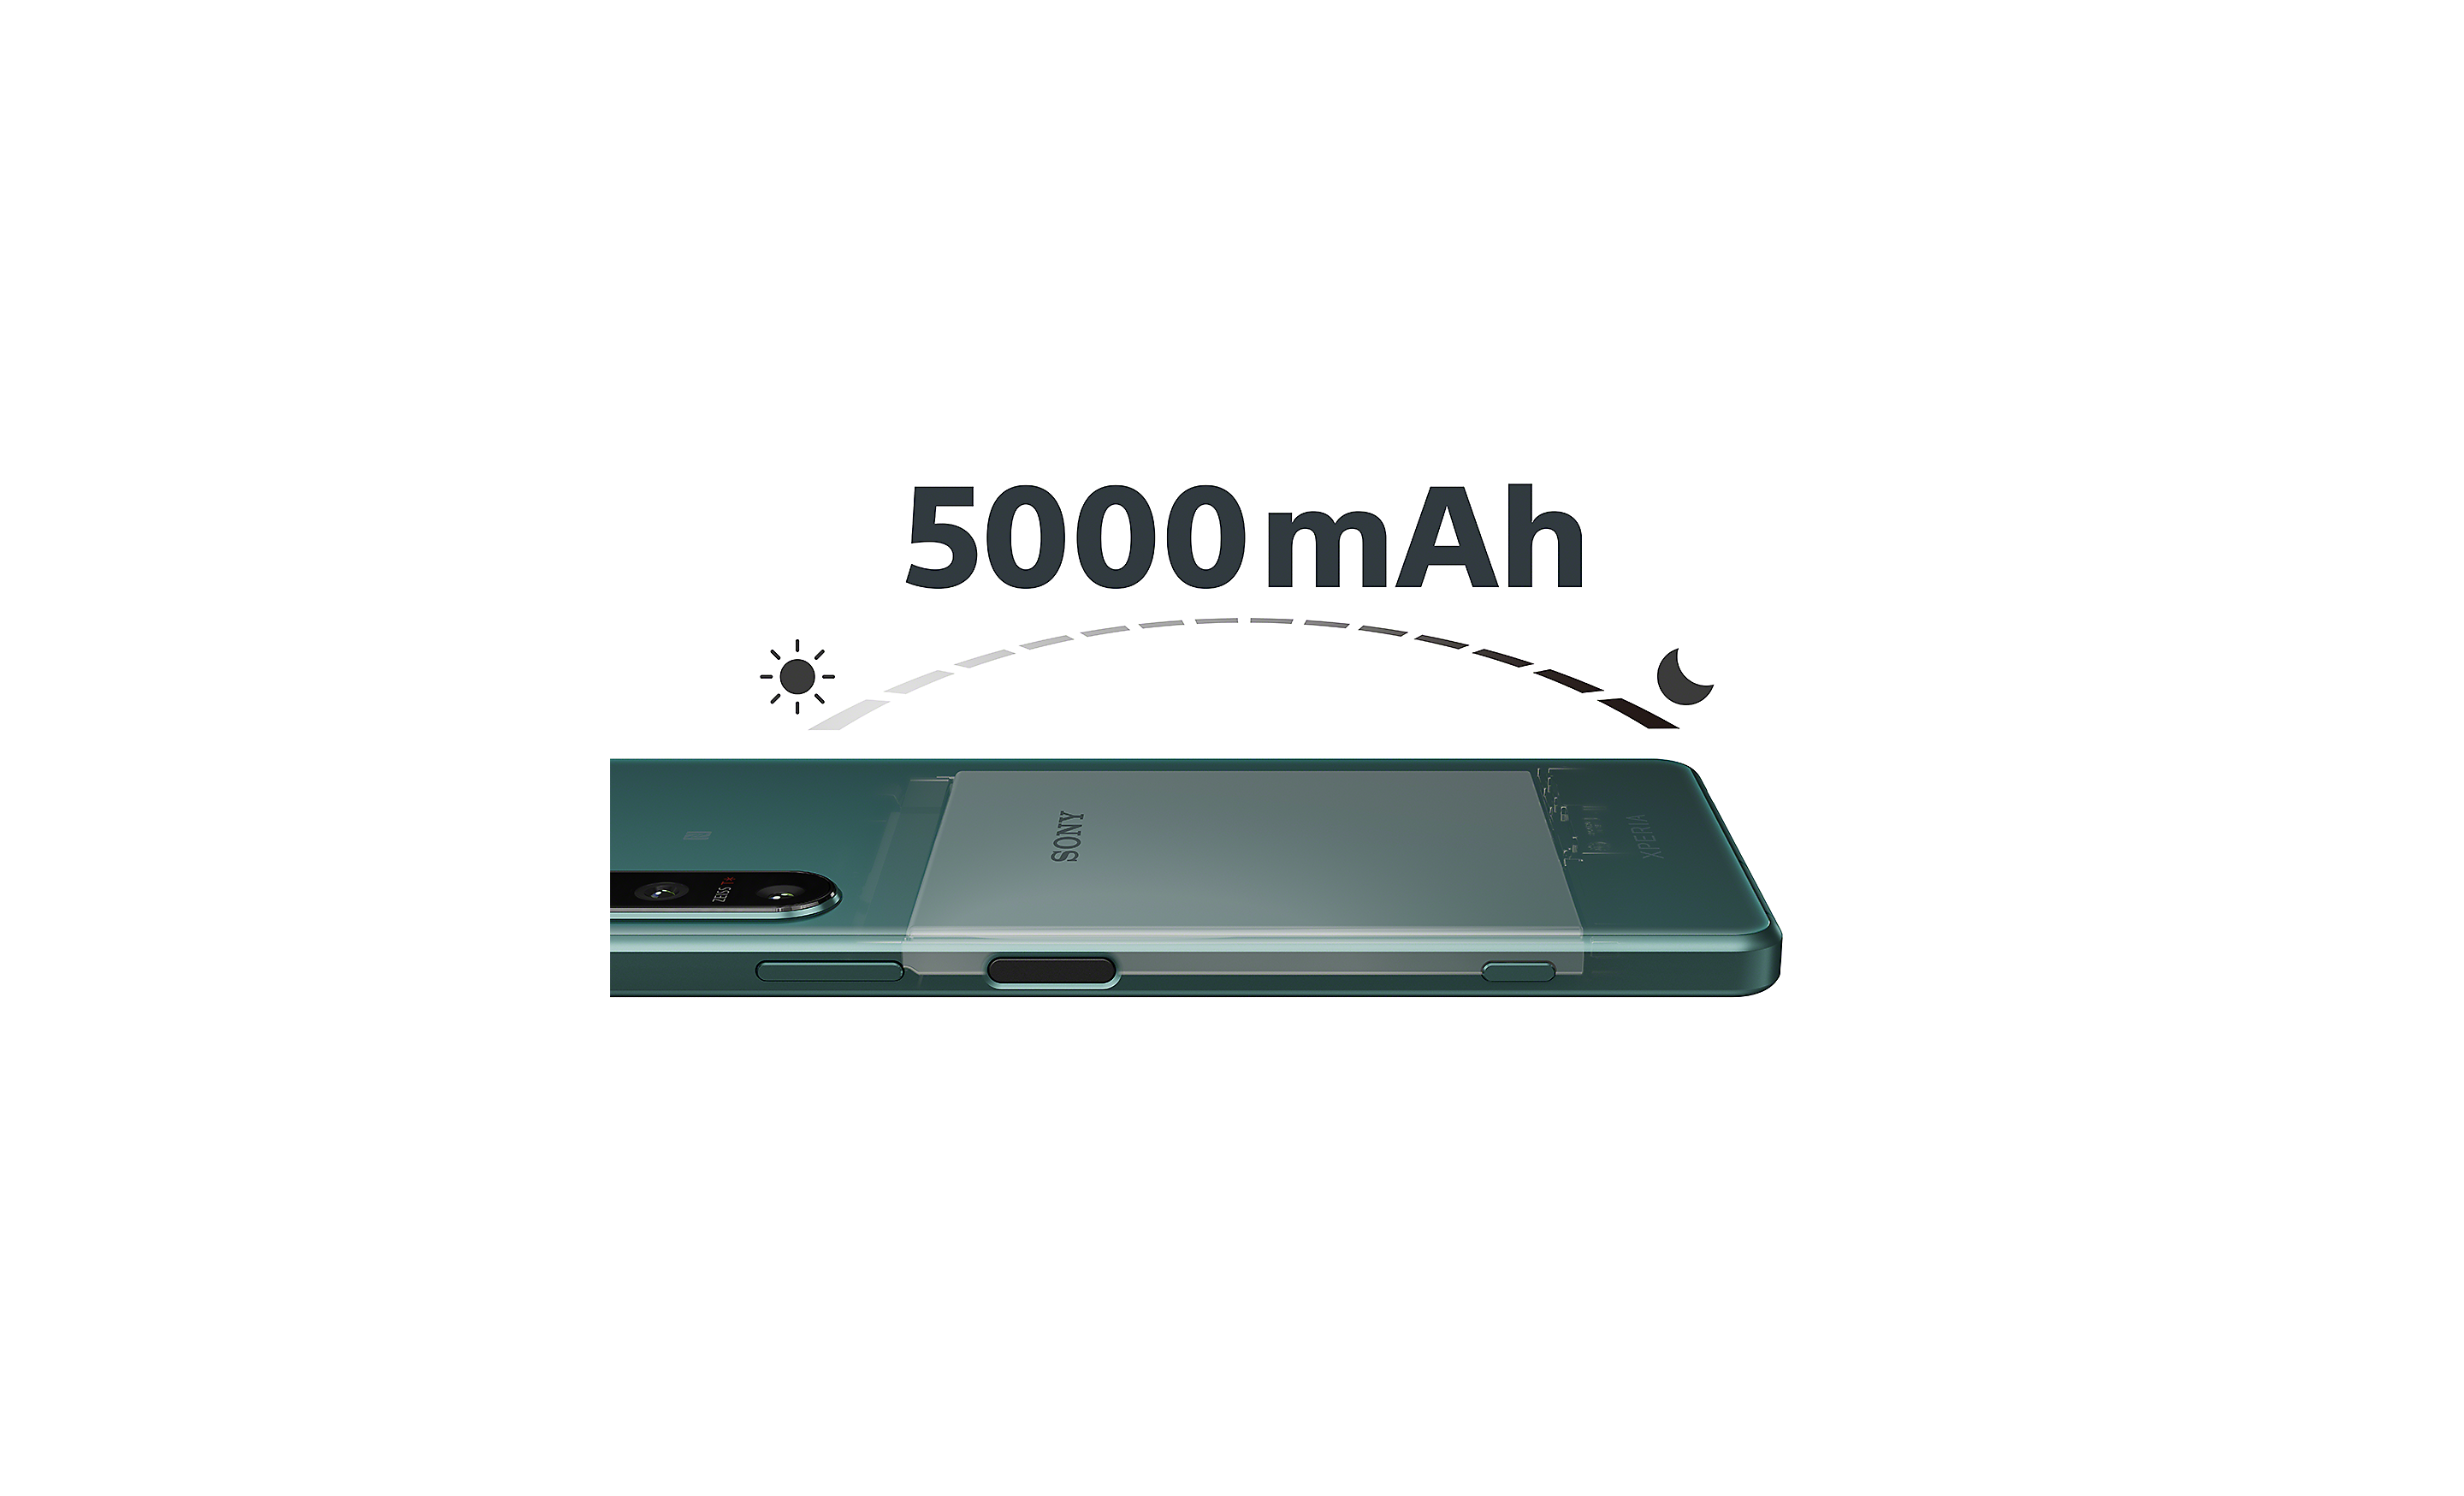 X-ray image of Xperia 5 IV showing large battery, plus logo for 5000mAh and graphic signifying day-to-night